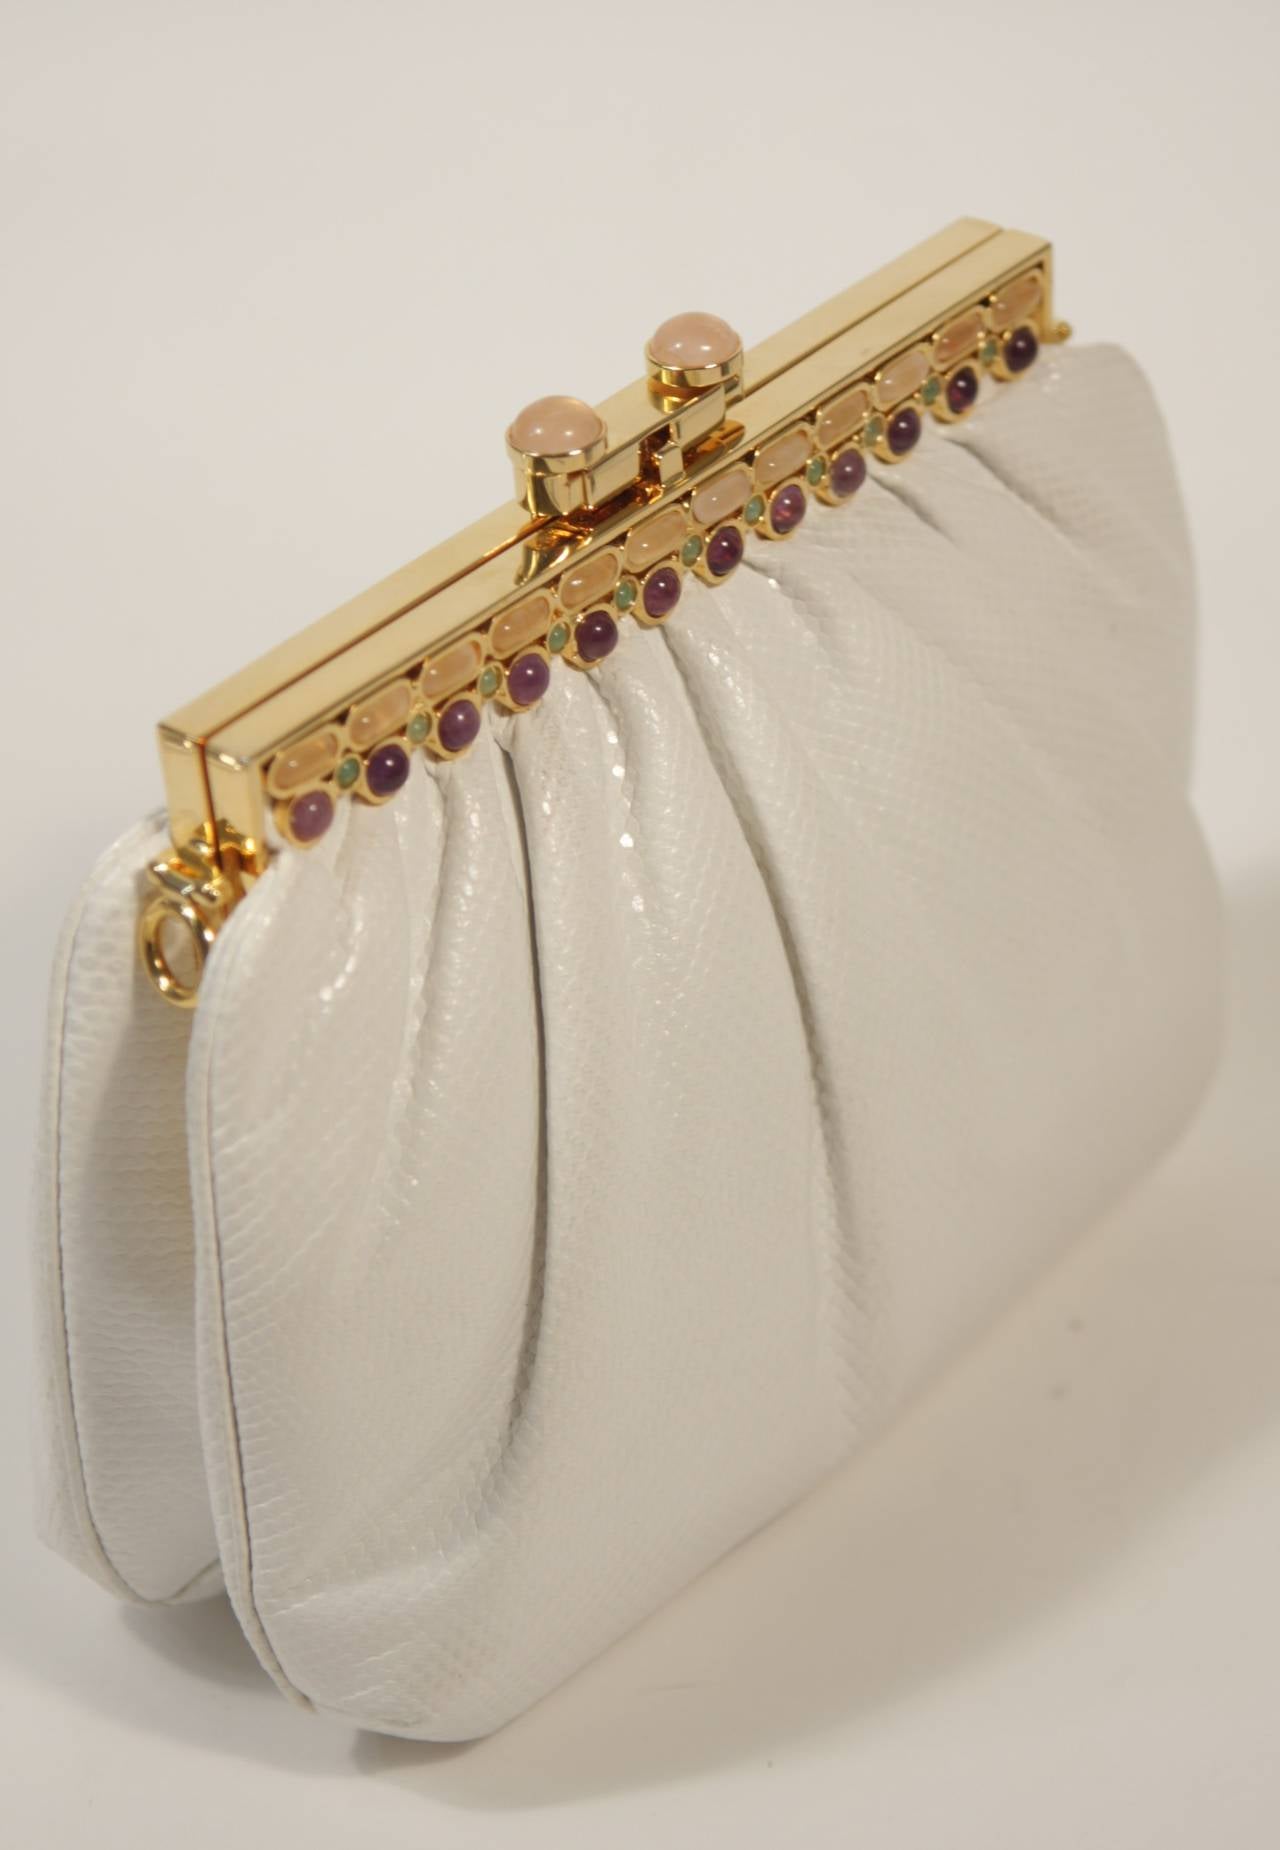 Judith Leiber Gathered White Lizard Purse with Multi-Stone Gold Frame 1